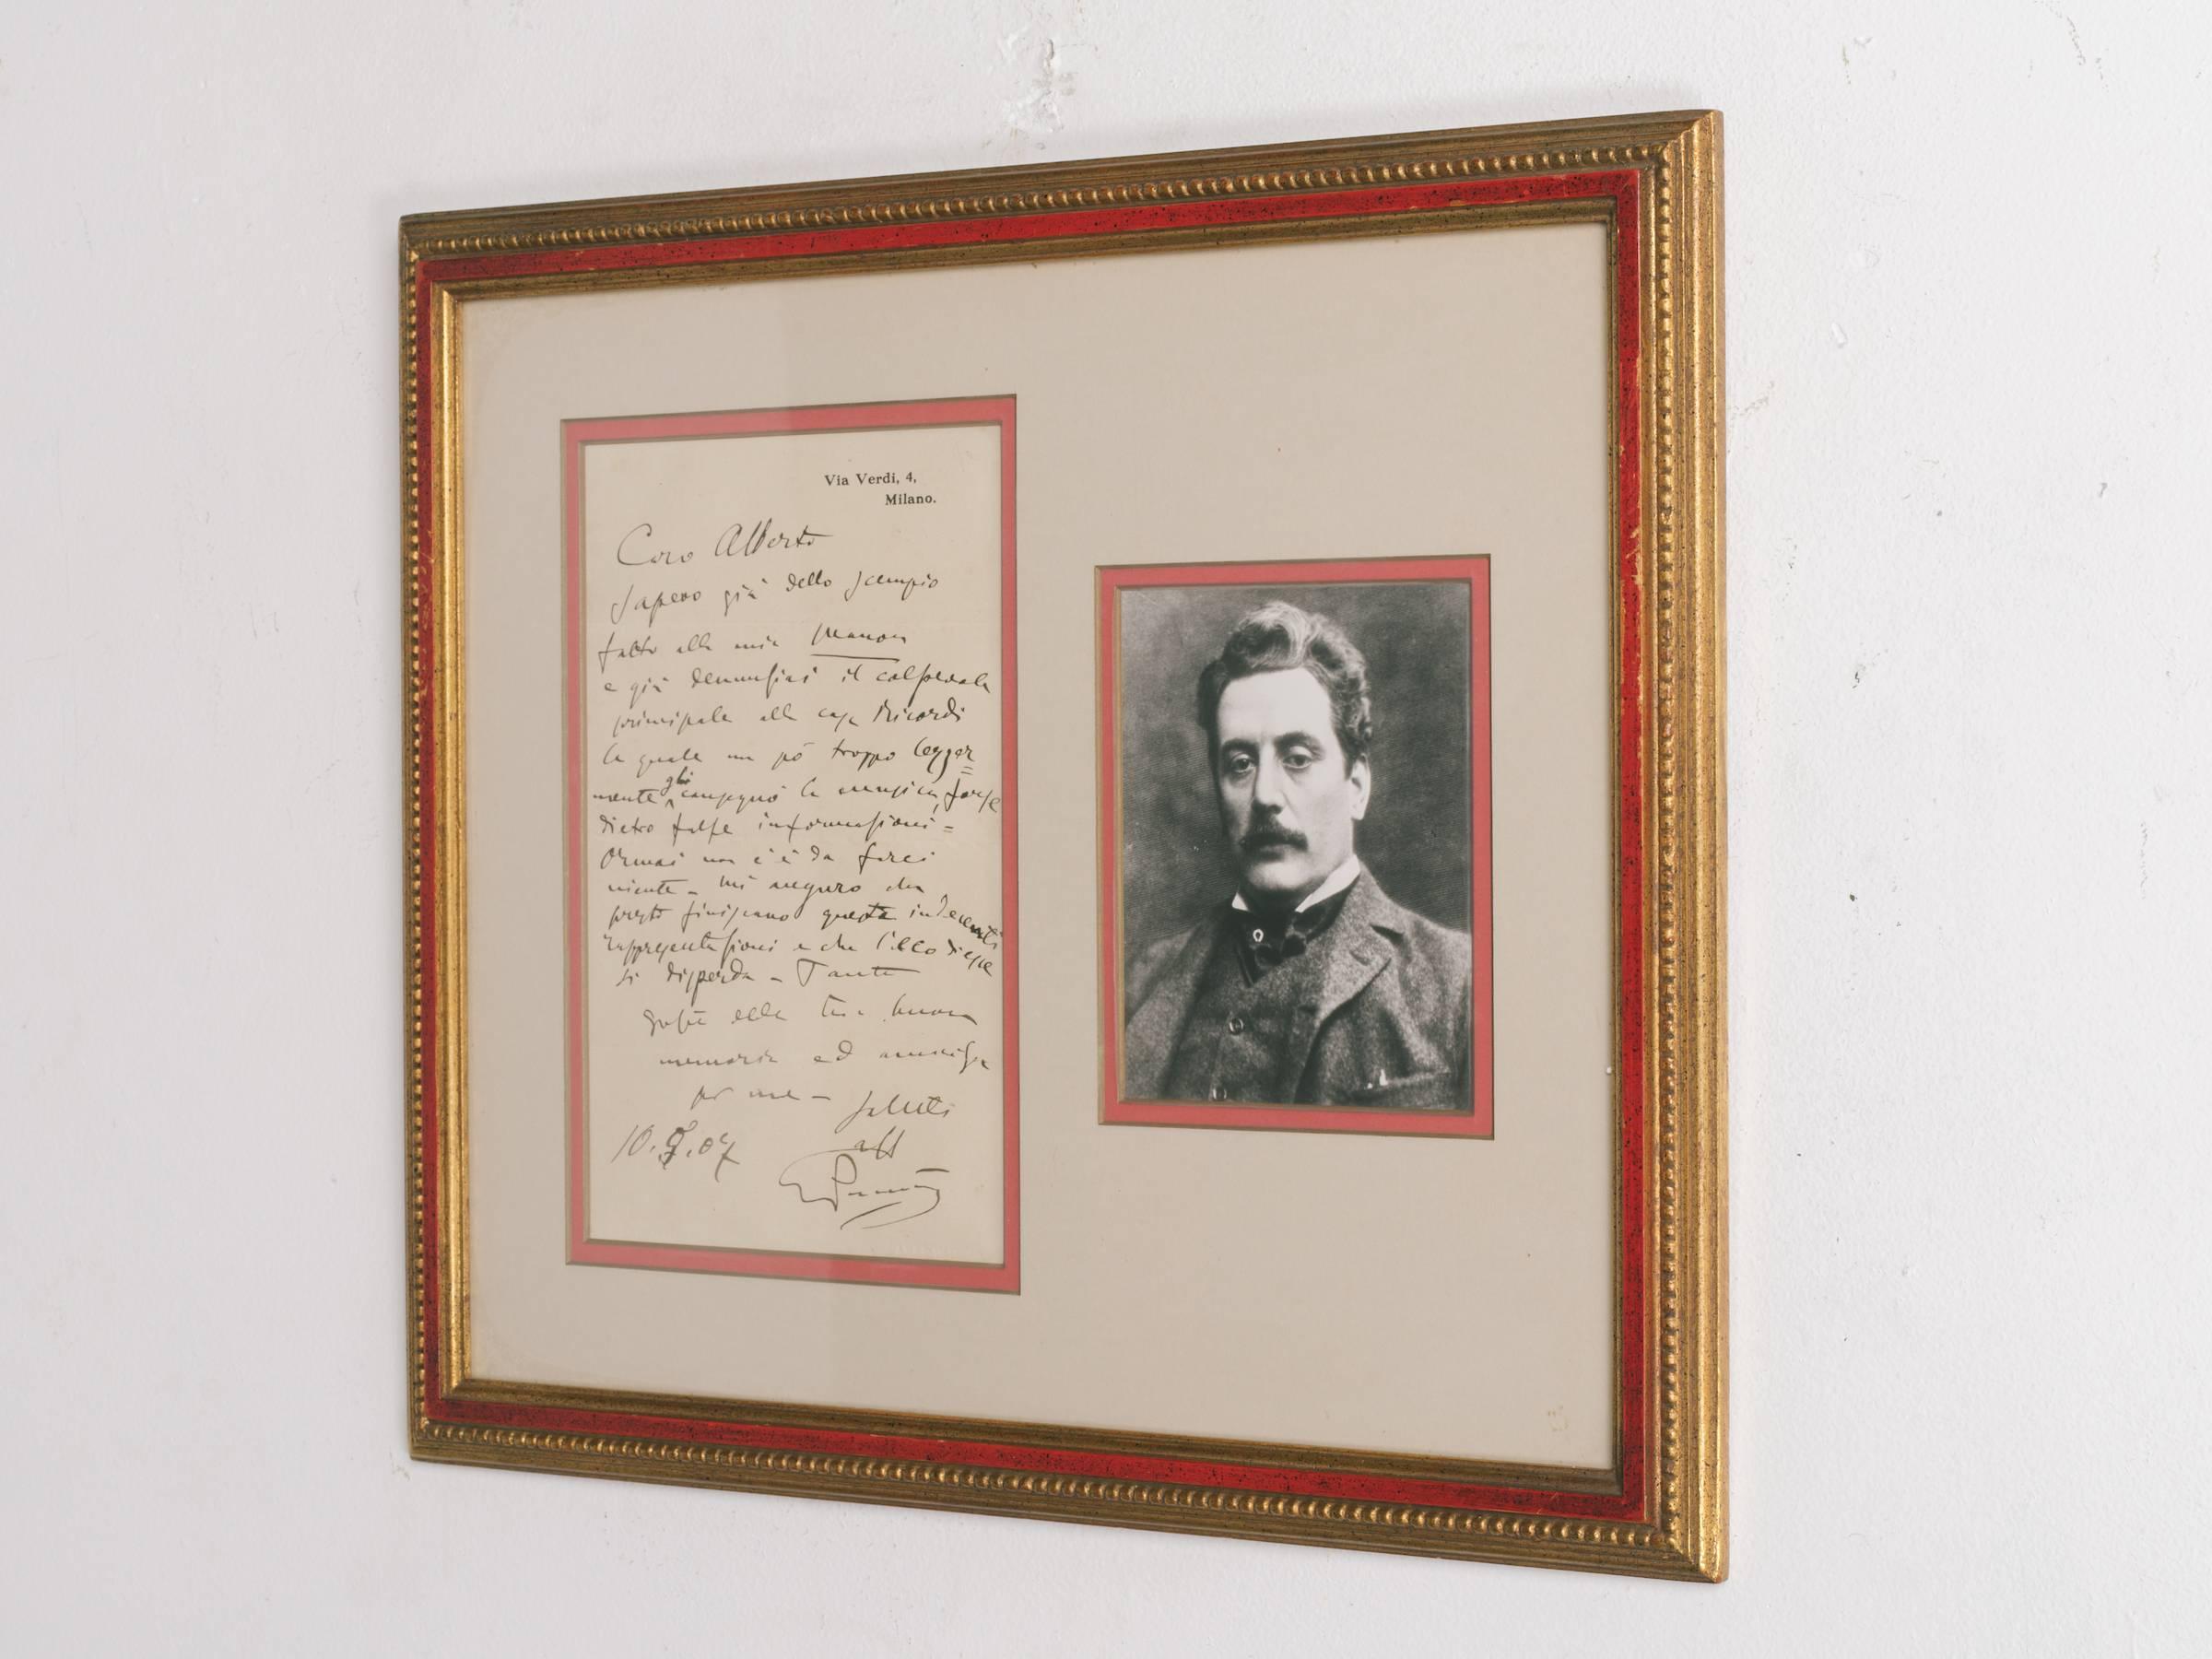 Giacomo Puccini autographed letter and envelope

 Street Verdi 4
 Milan
Dear Albert,
 I already knew of the mockery done to my Manon , and I already 
 denounced the main culprit to Ricordi Firm a bit too thoughtlessly delivered to him the